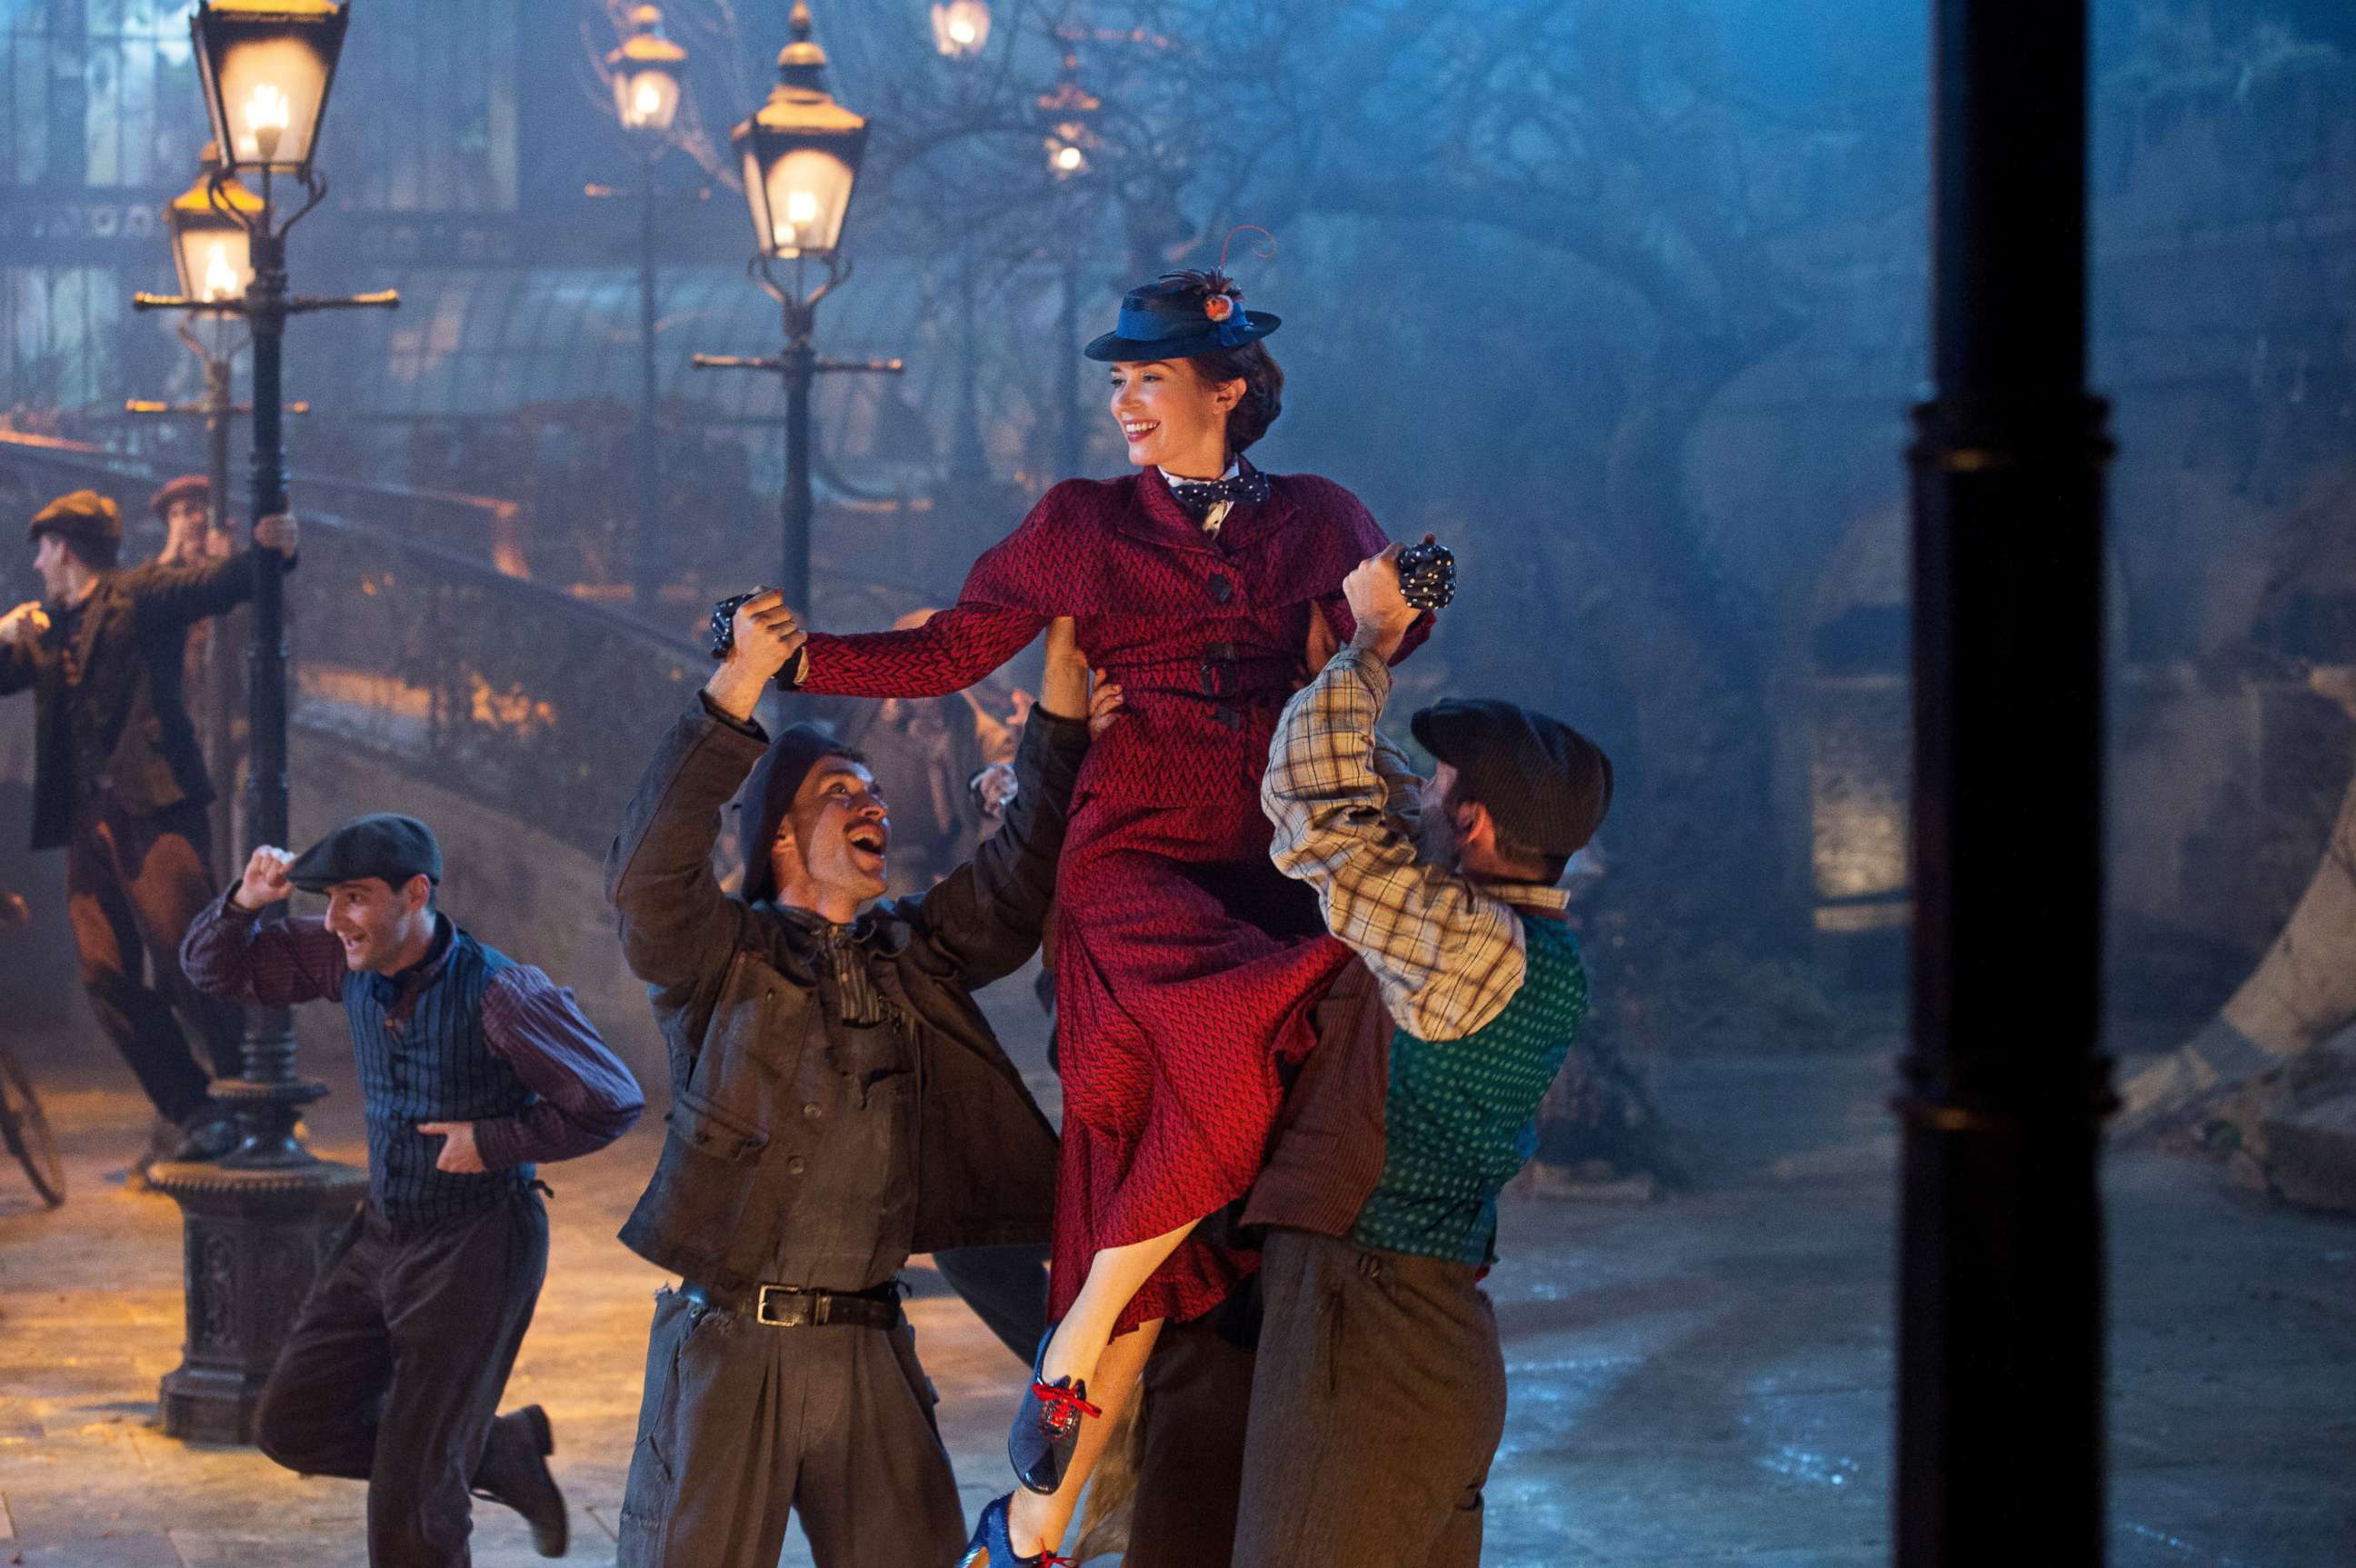 PHOTO: A scene from "Mary Poppins Returns."
